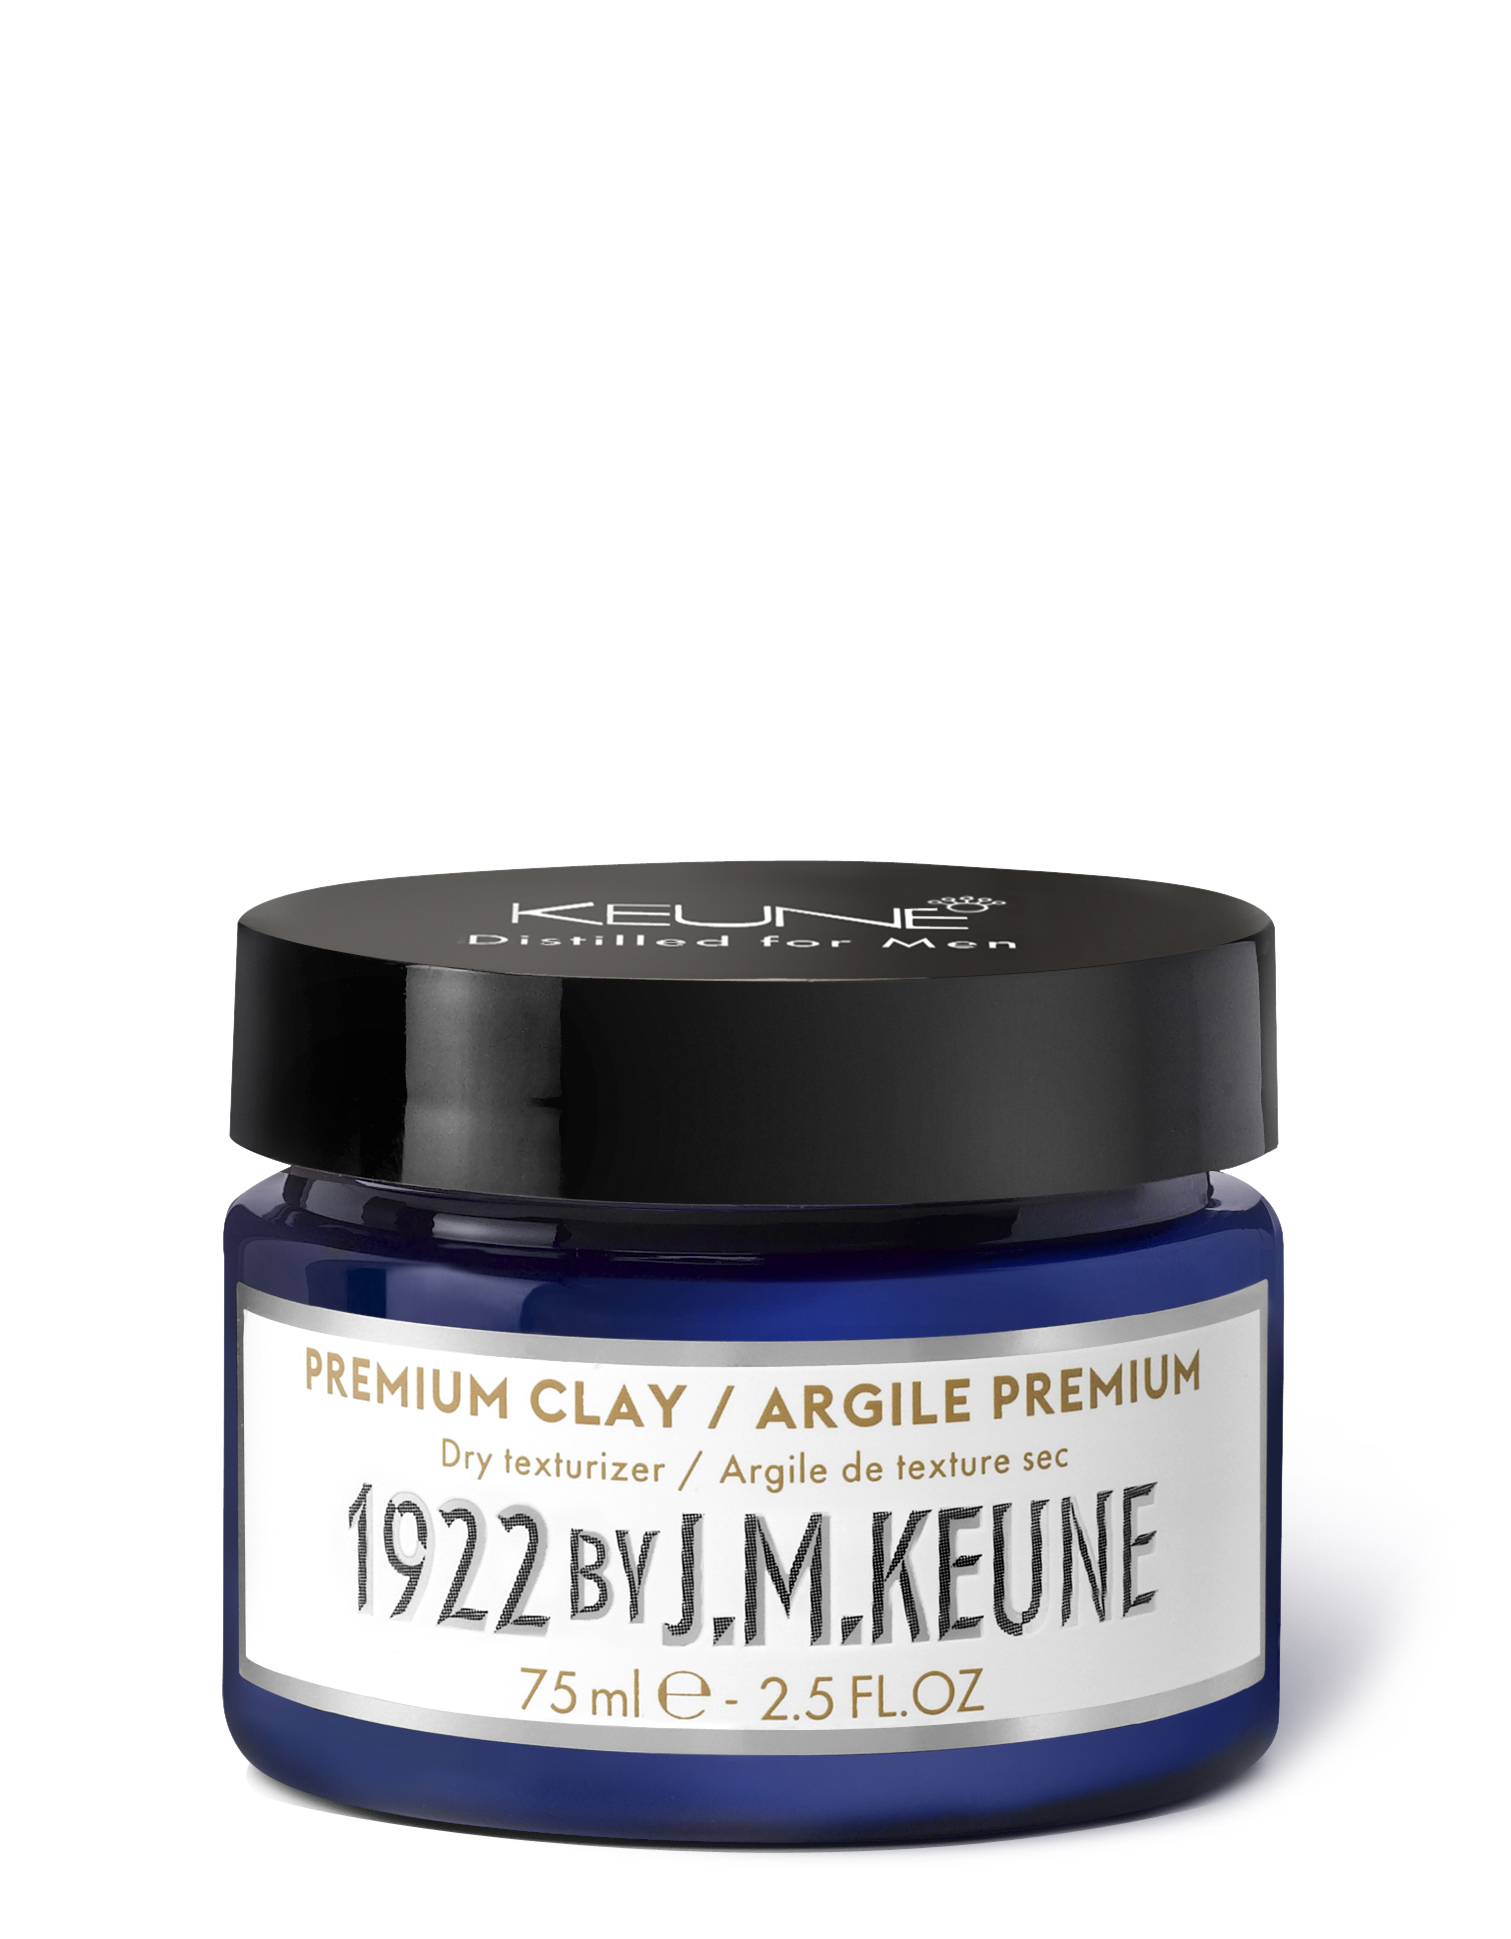 Discover 1922 PREMIUM CLAY: Dry styling paste for men with strong hold and matte finish. Ideal for short hairstyles for texture and definition. On keune.ch.